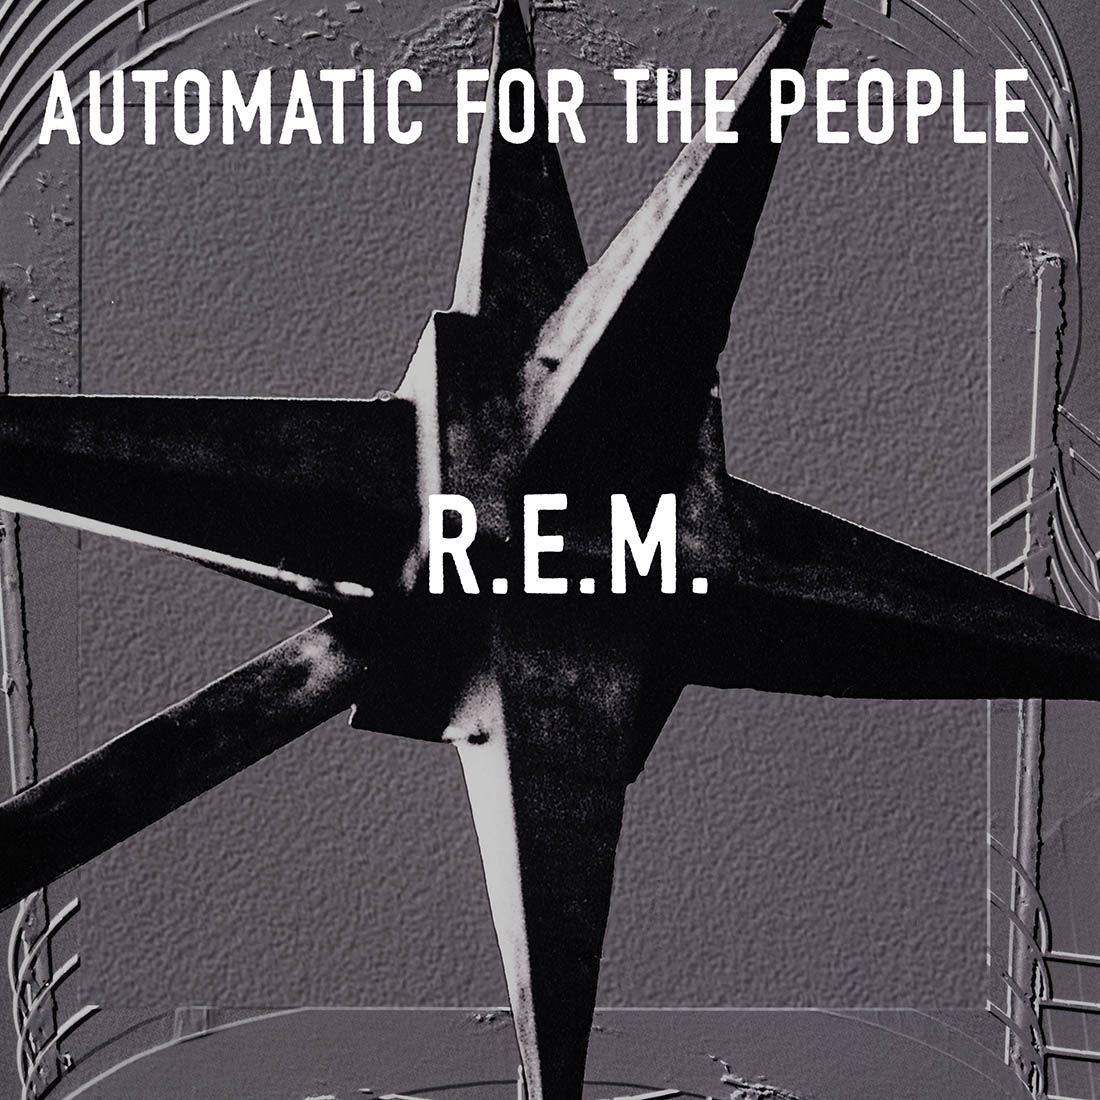 R.E.M. - Automatic For The People (25th Anniversary Edition) - LP - 180g Vinyl